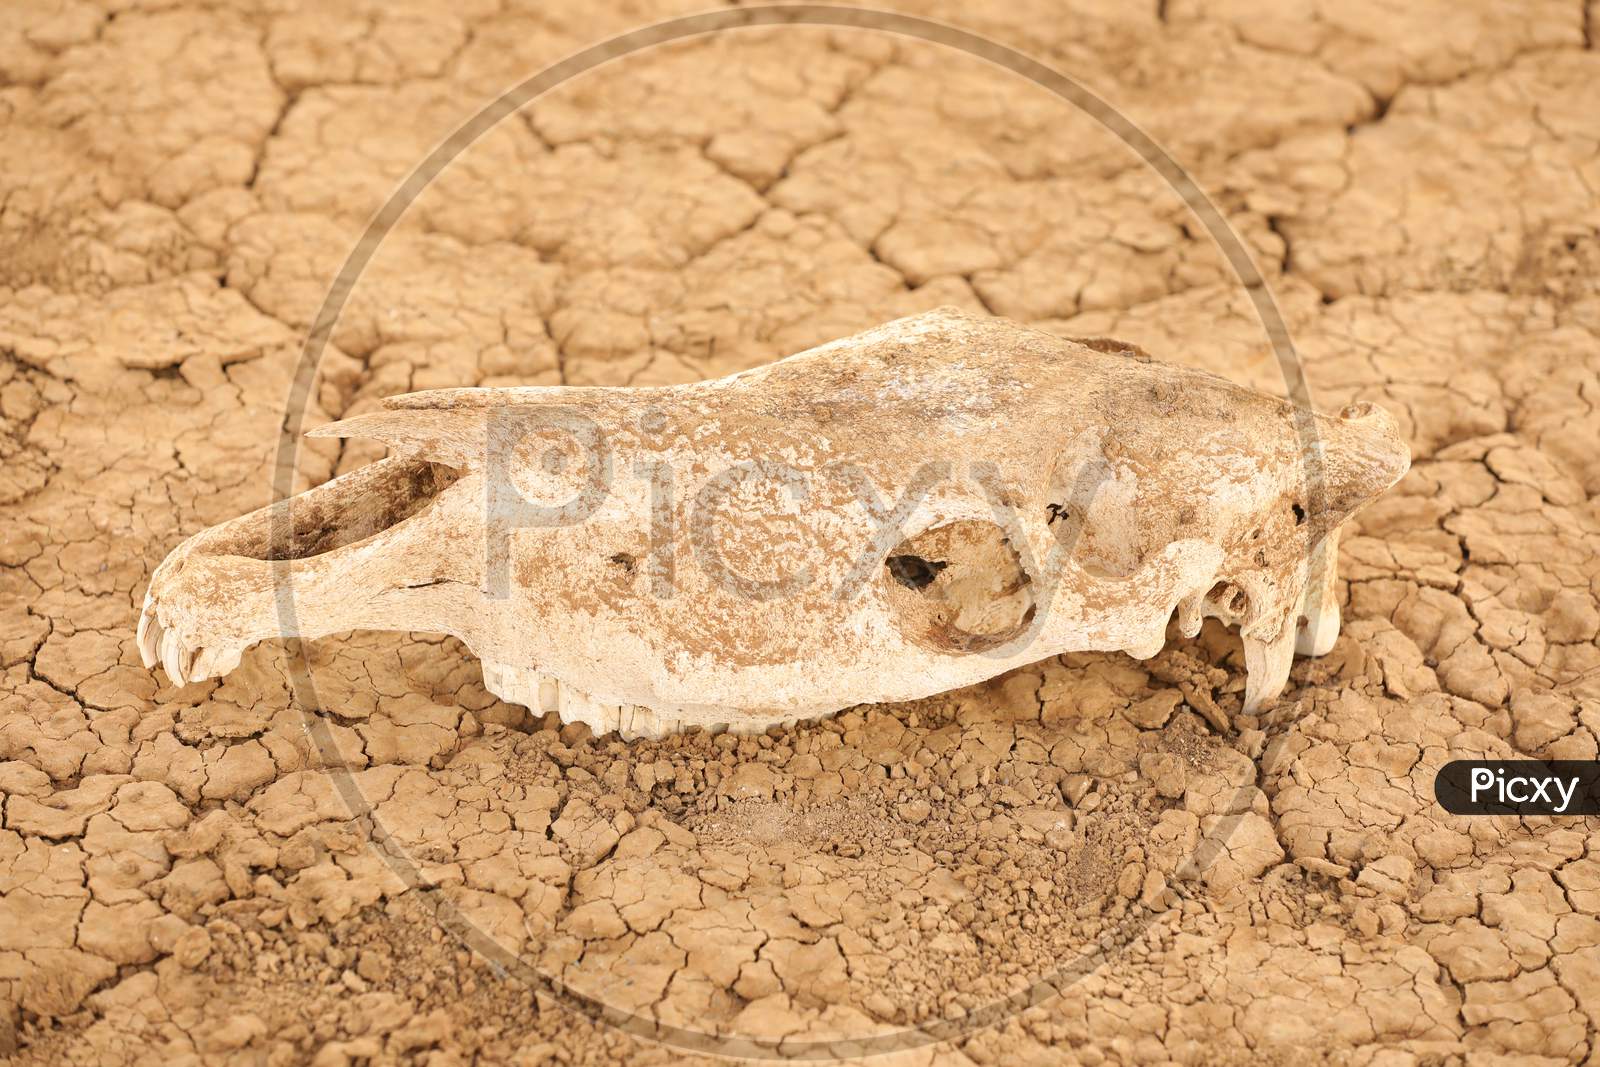 A remnant of skull of an animal